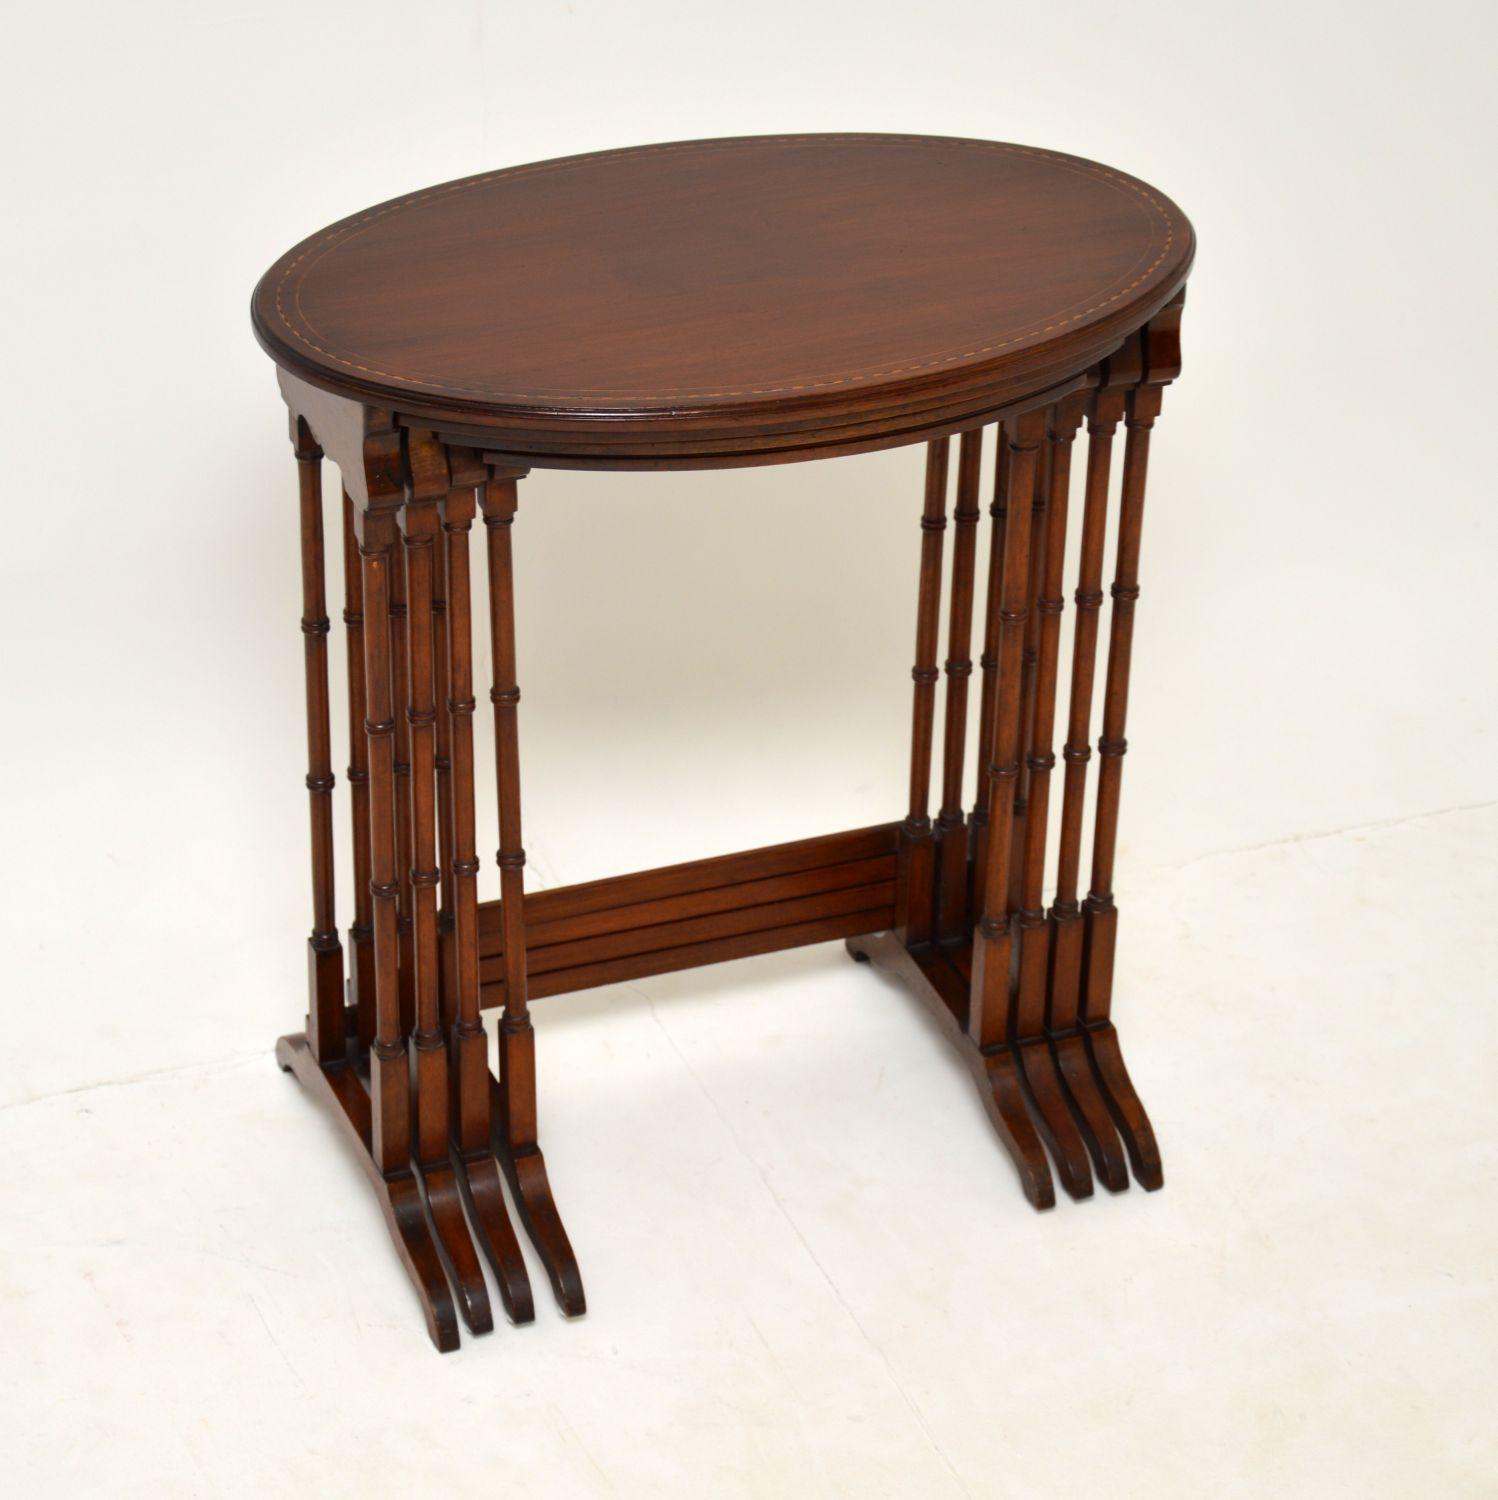 A beautiful and elegant Edwardian nest of four tables. They date from around the 1900-1910 period.

The quality is excellent and these have a lovely design. The solid mahogany tops are inlaid with satin wood, they have a gorgeous colour and